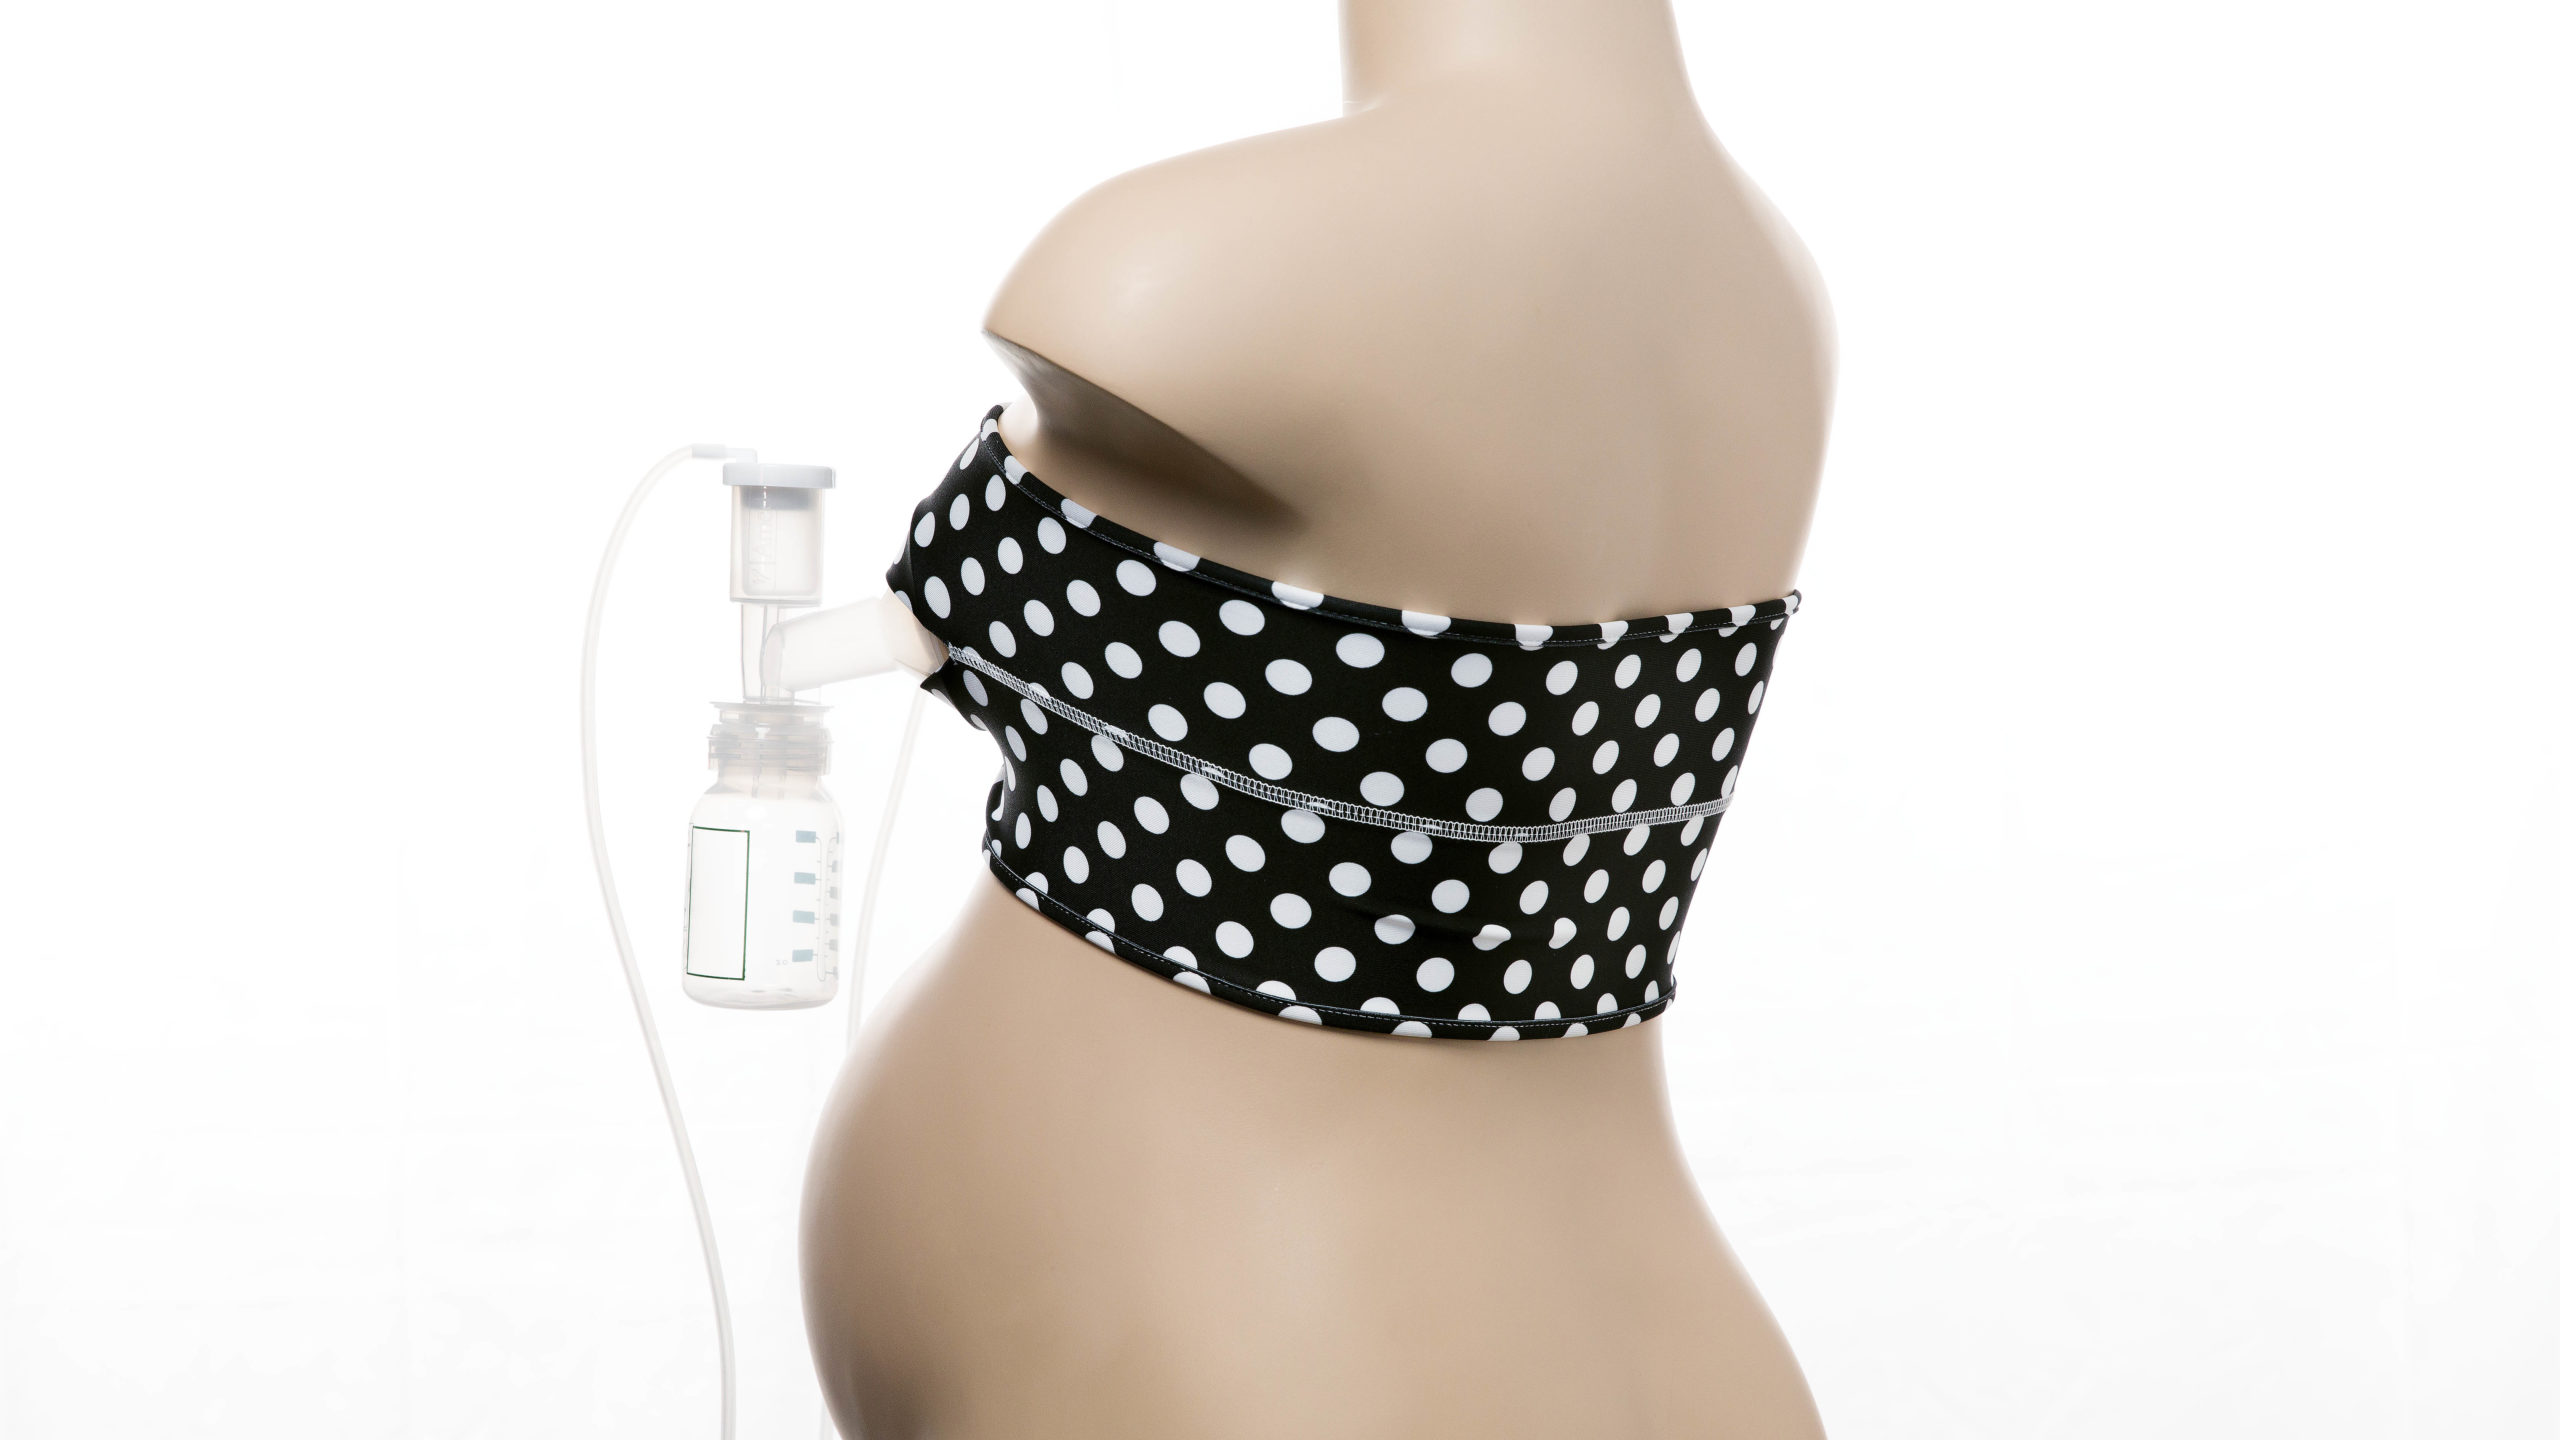 Hands free cotton pumping bra -2000 M,l Adjustable,fits all